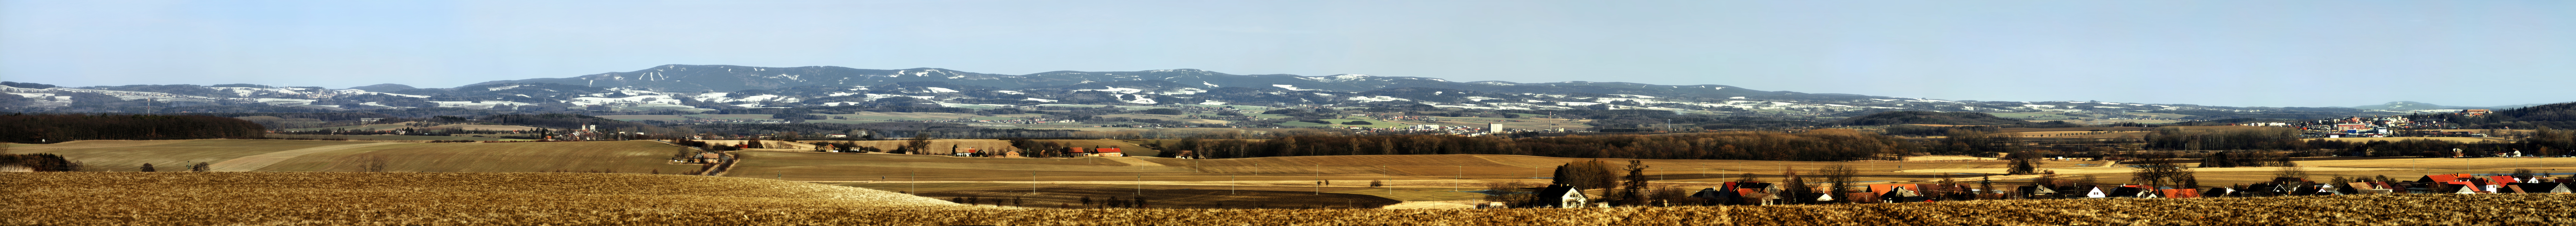 Orlické hory - panorama from near Rohenice (CZ - equalized).jpg